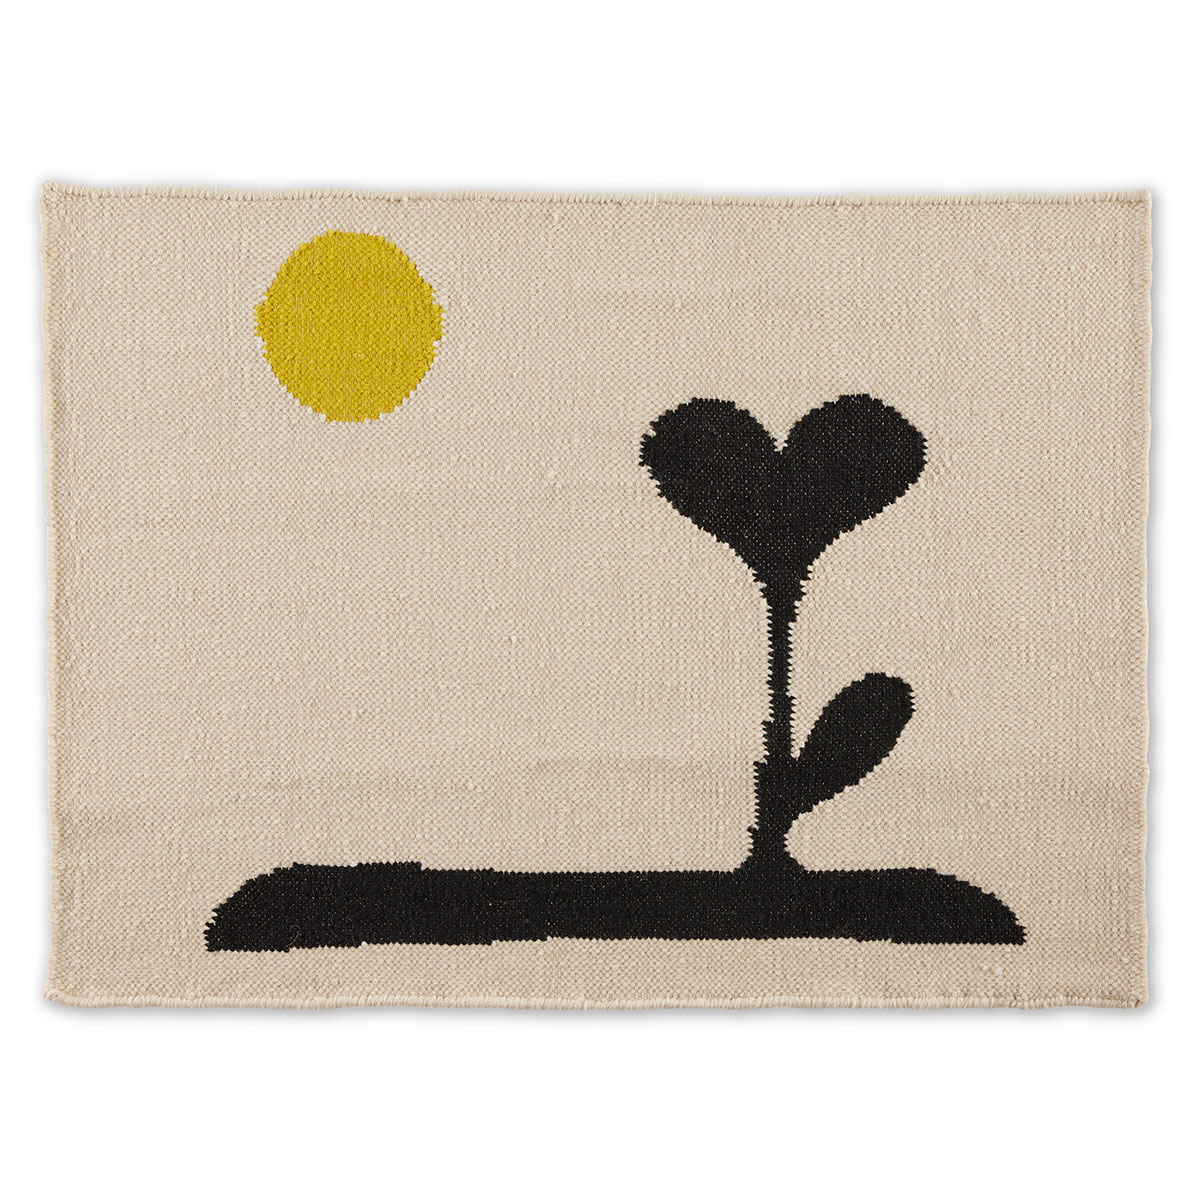 An abstract rug with a yellow sunshine and a black heart named Sunshine Love.